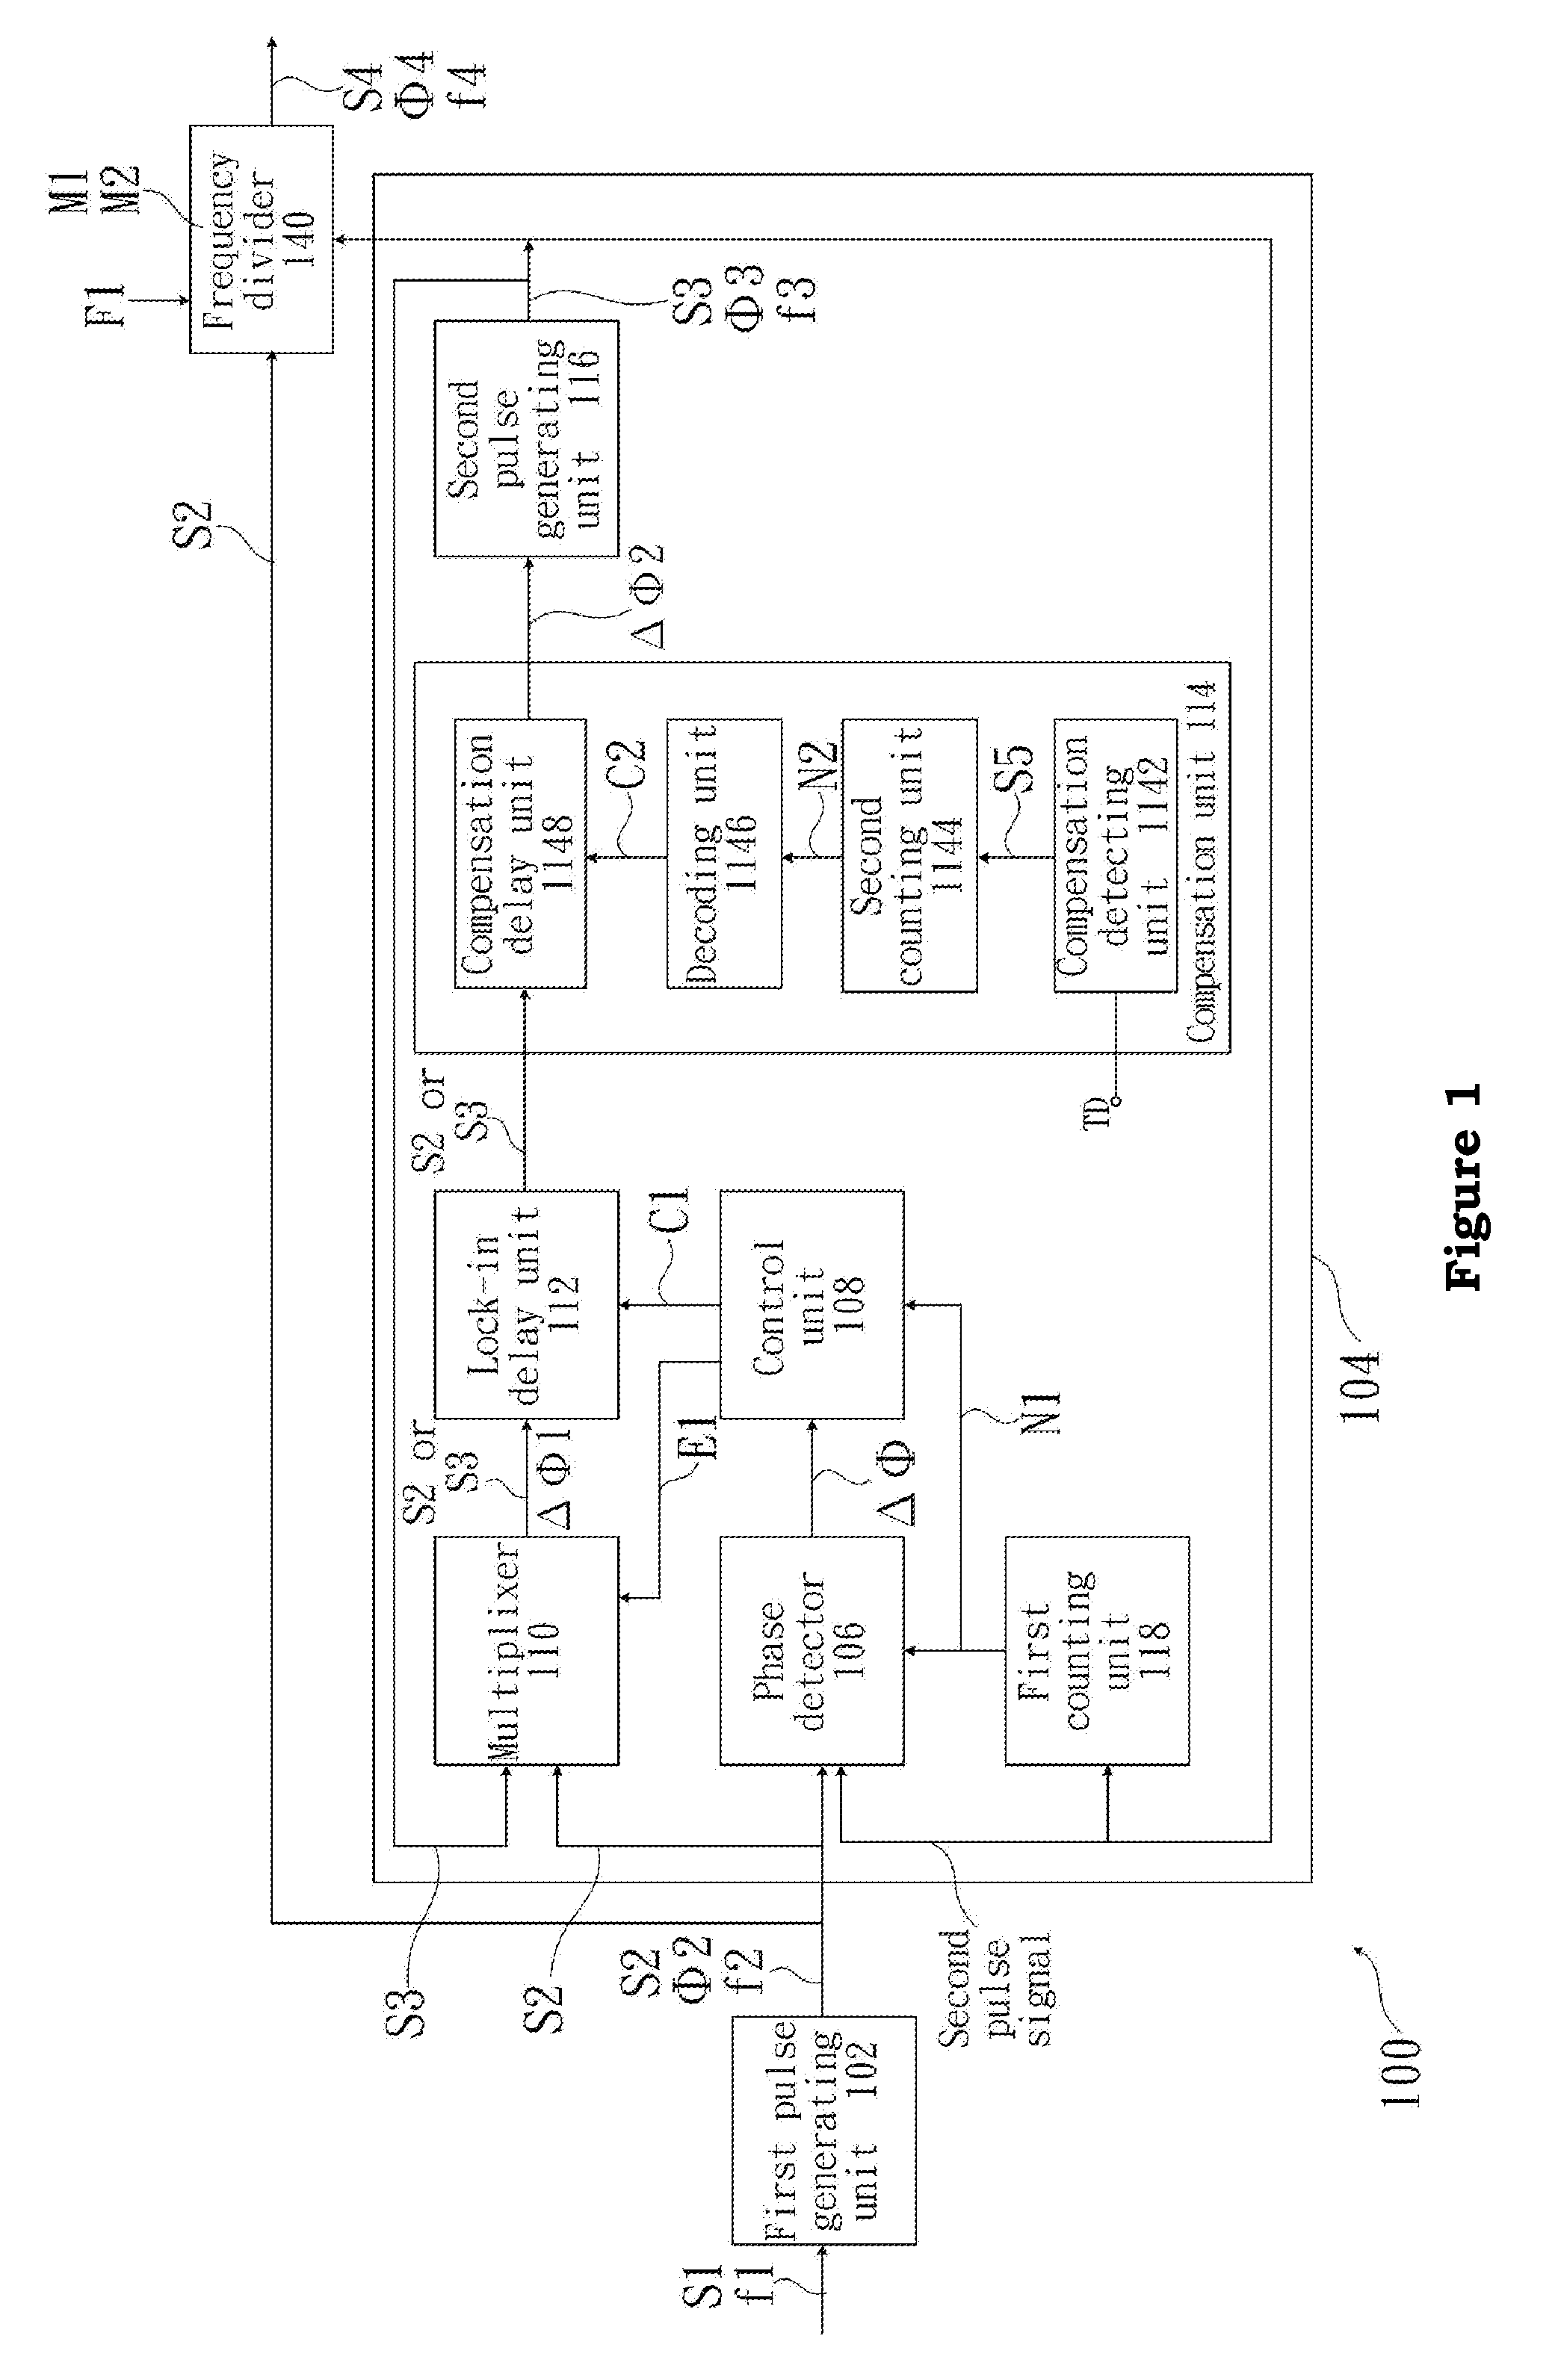 Programmable clock generator used in dynamic-voltage-and-frequency-scaling (DVFS) operated in sub- and near- threshold region